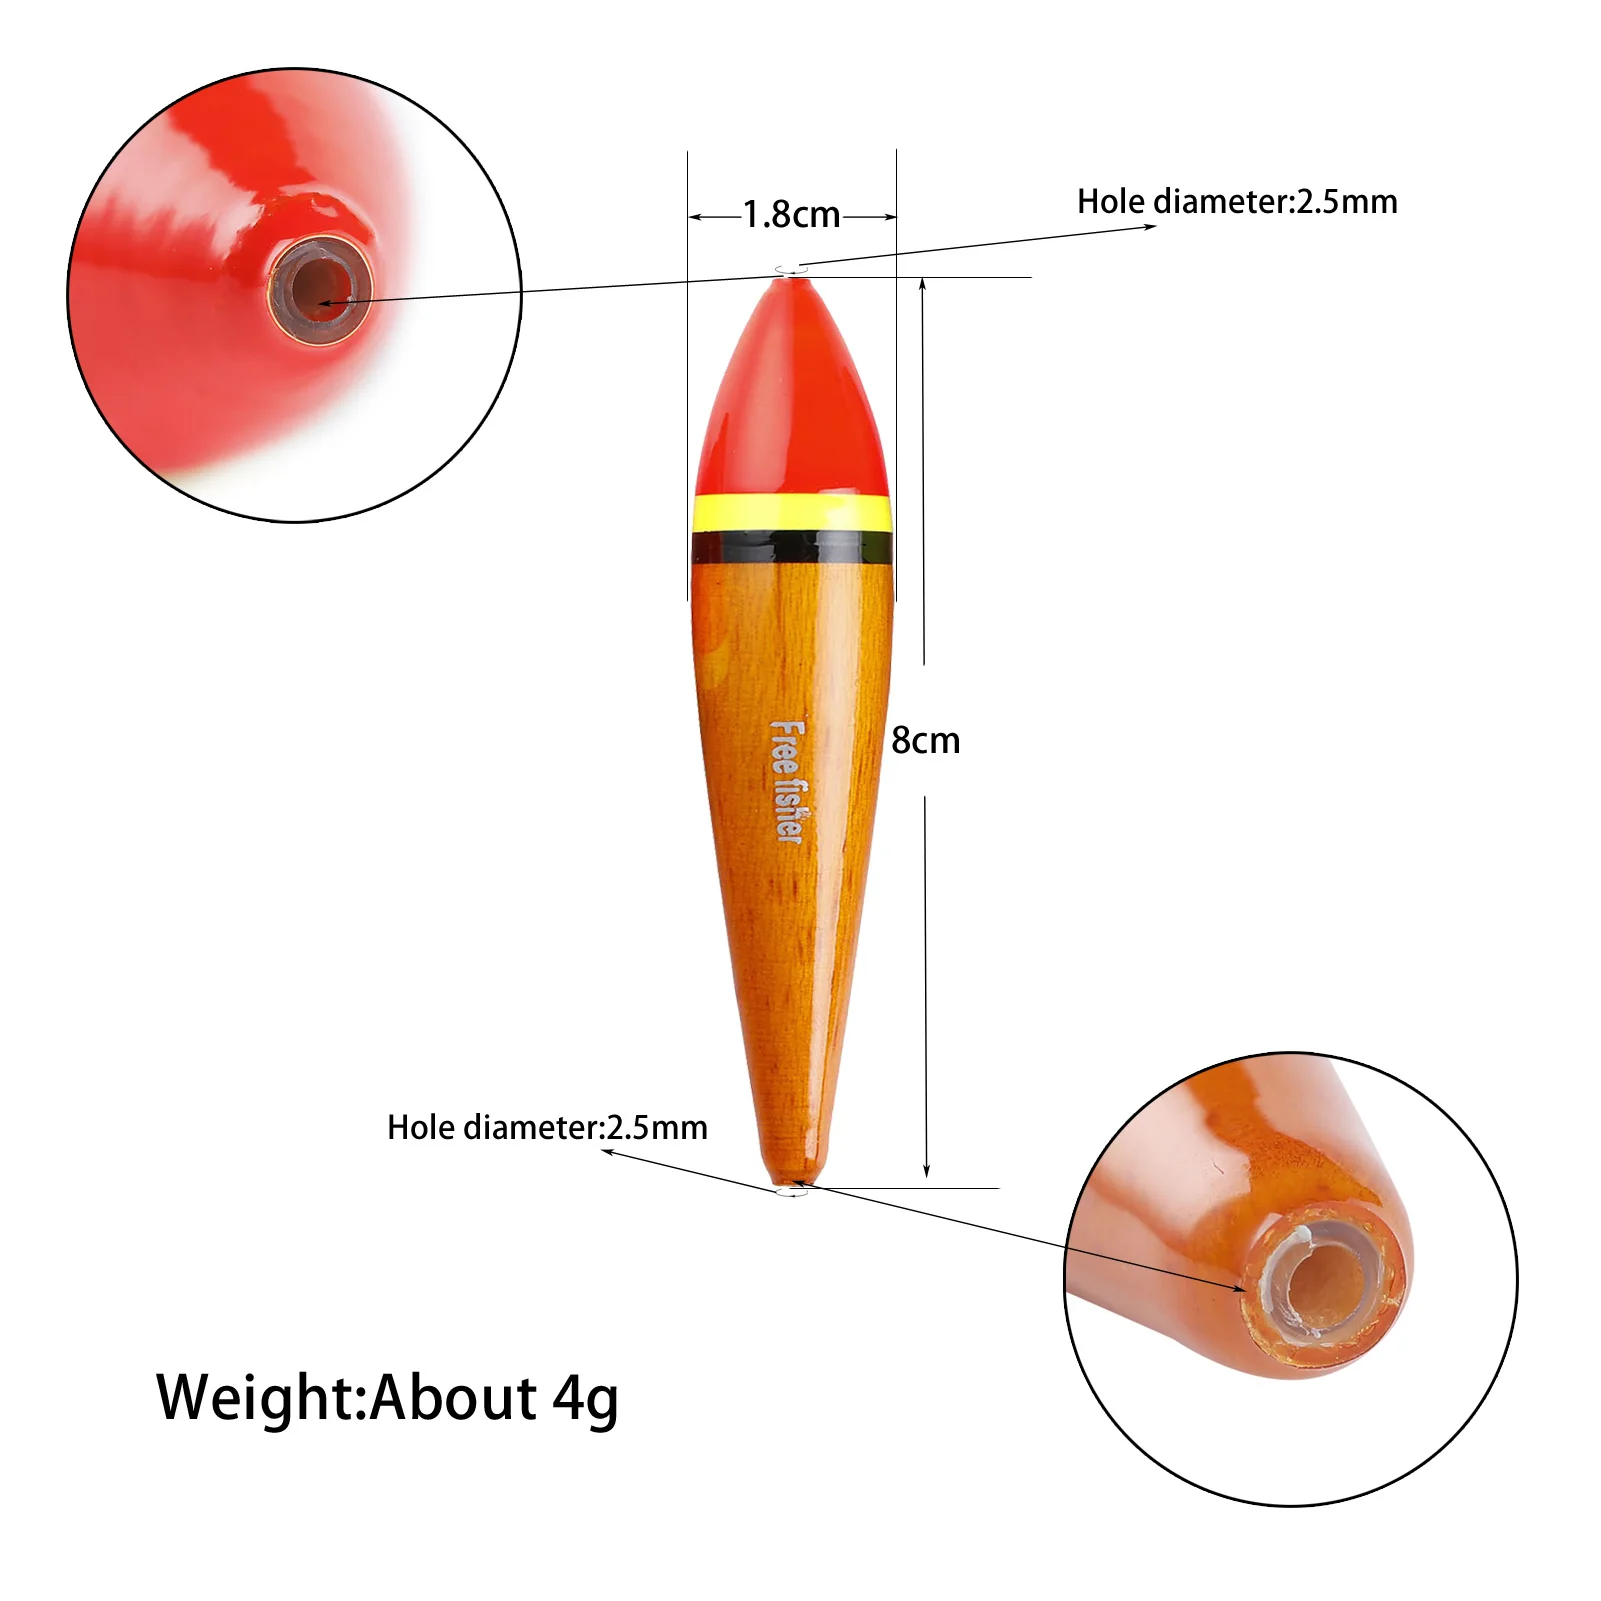 10pcs/Lot Fishing Bobbers 8cm/3.15in 4g/0.14oz Fishing Buoy Cork Wobble  Balsa Wood Floats with Hole Red Buoy Fishing Floats